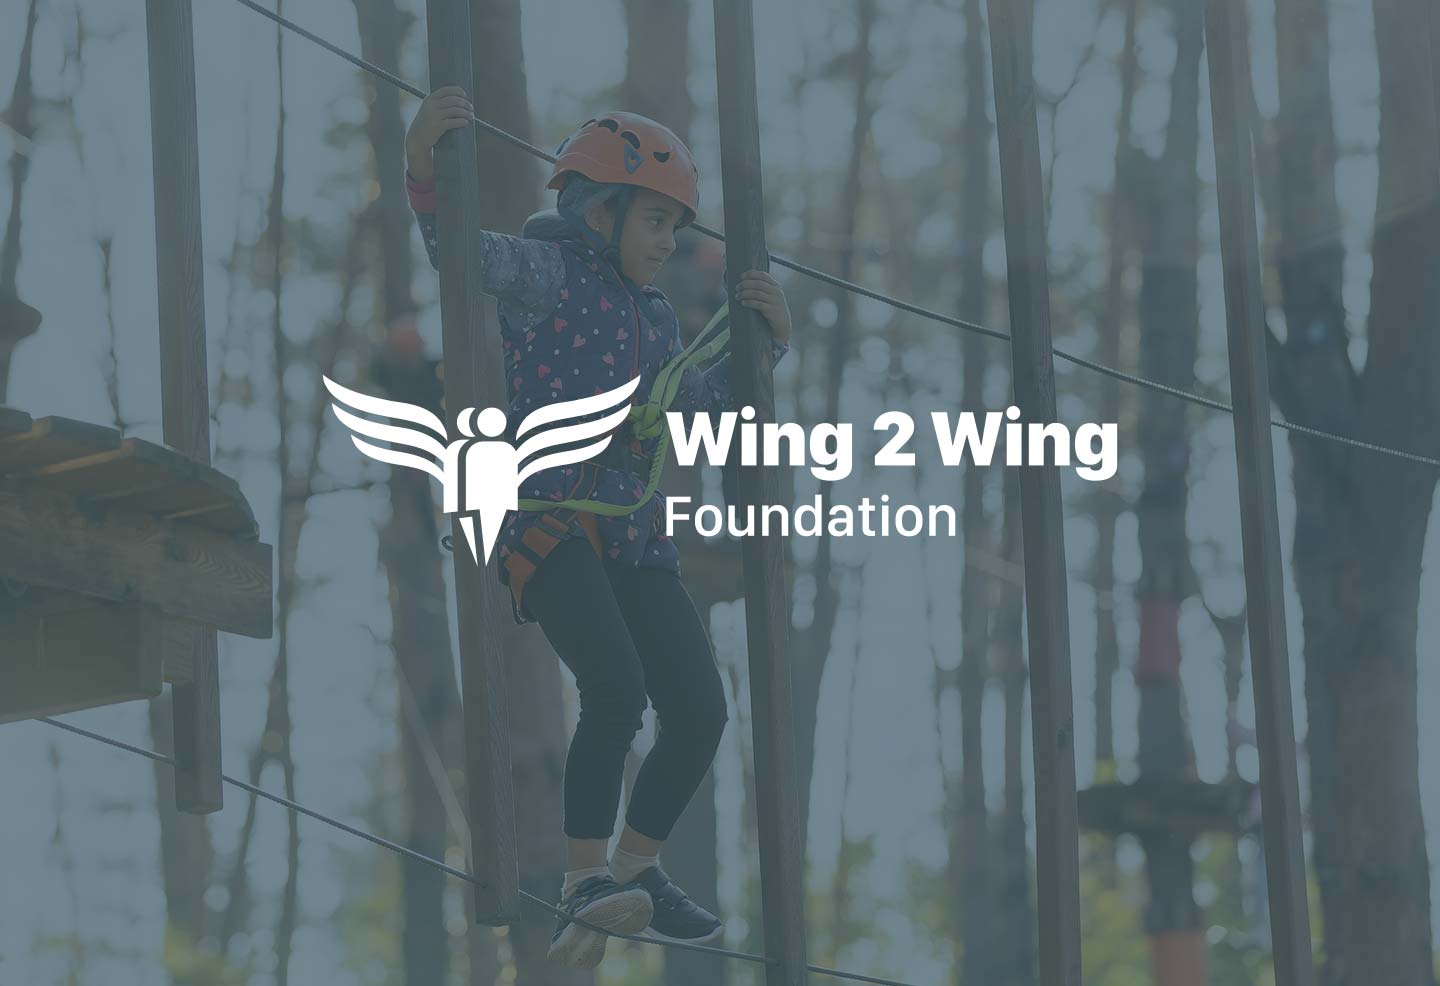 Child using zip lining course with white text that says "Wing 2 Wing Foundation" over the child